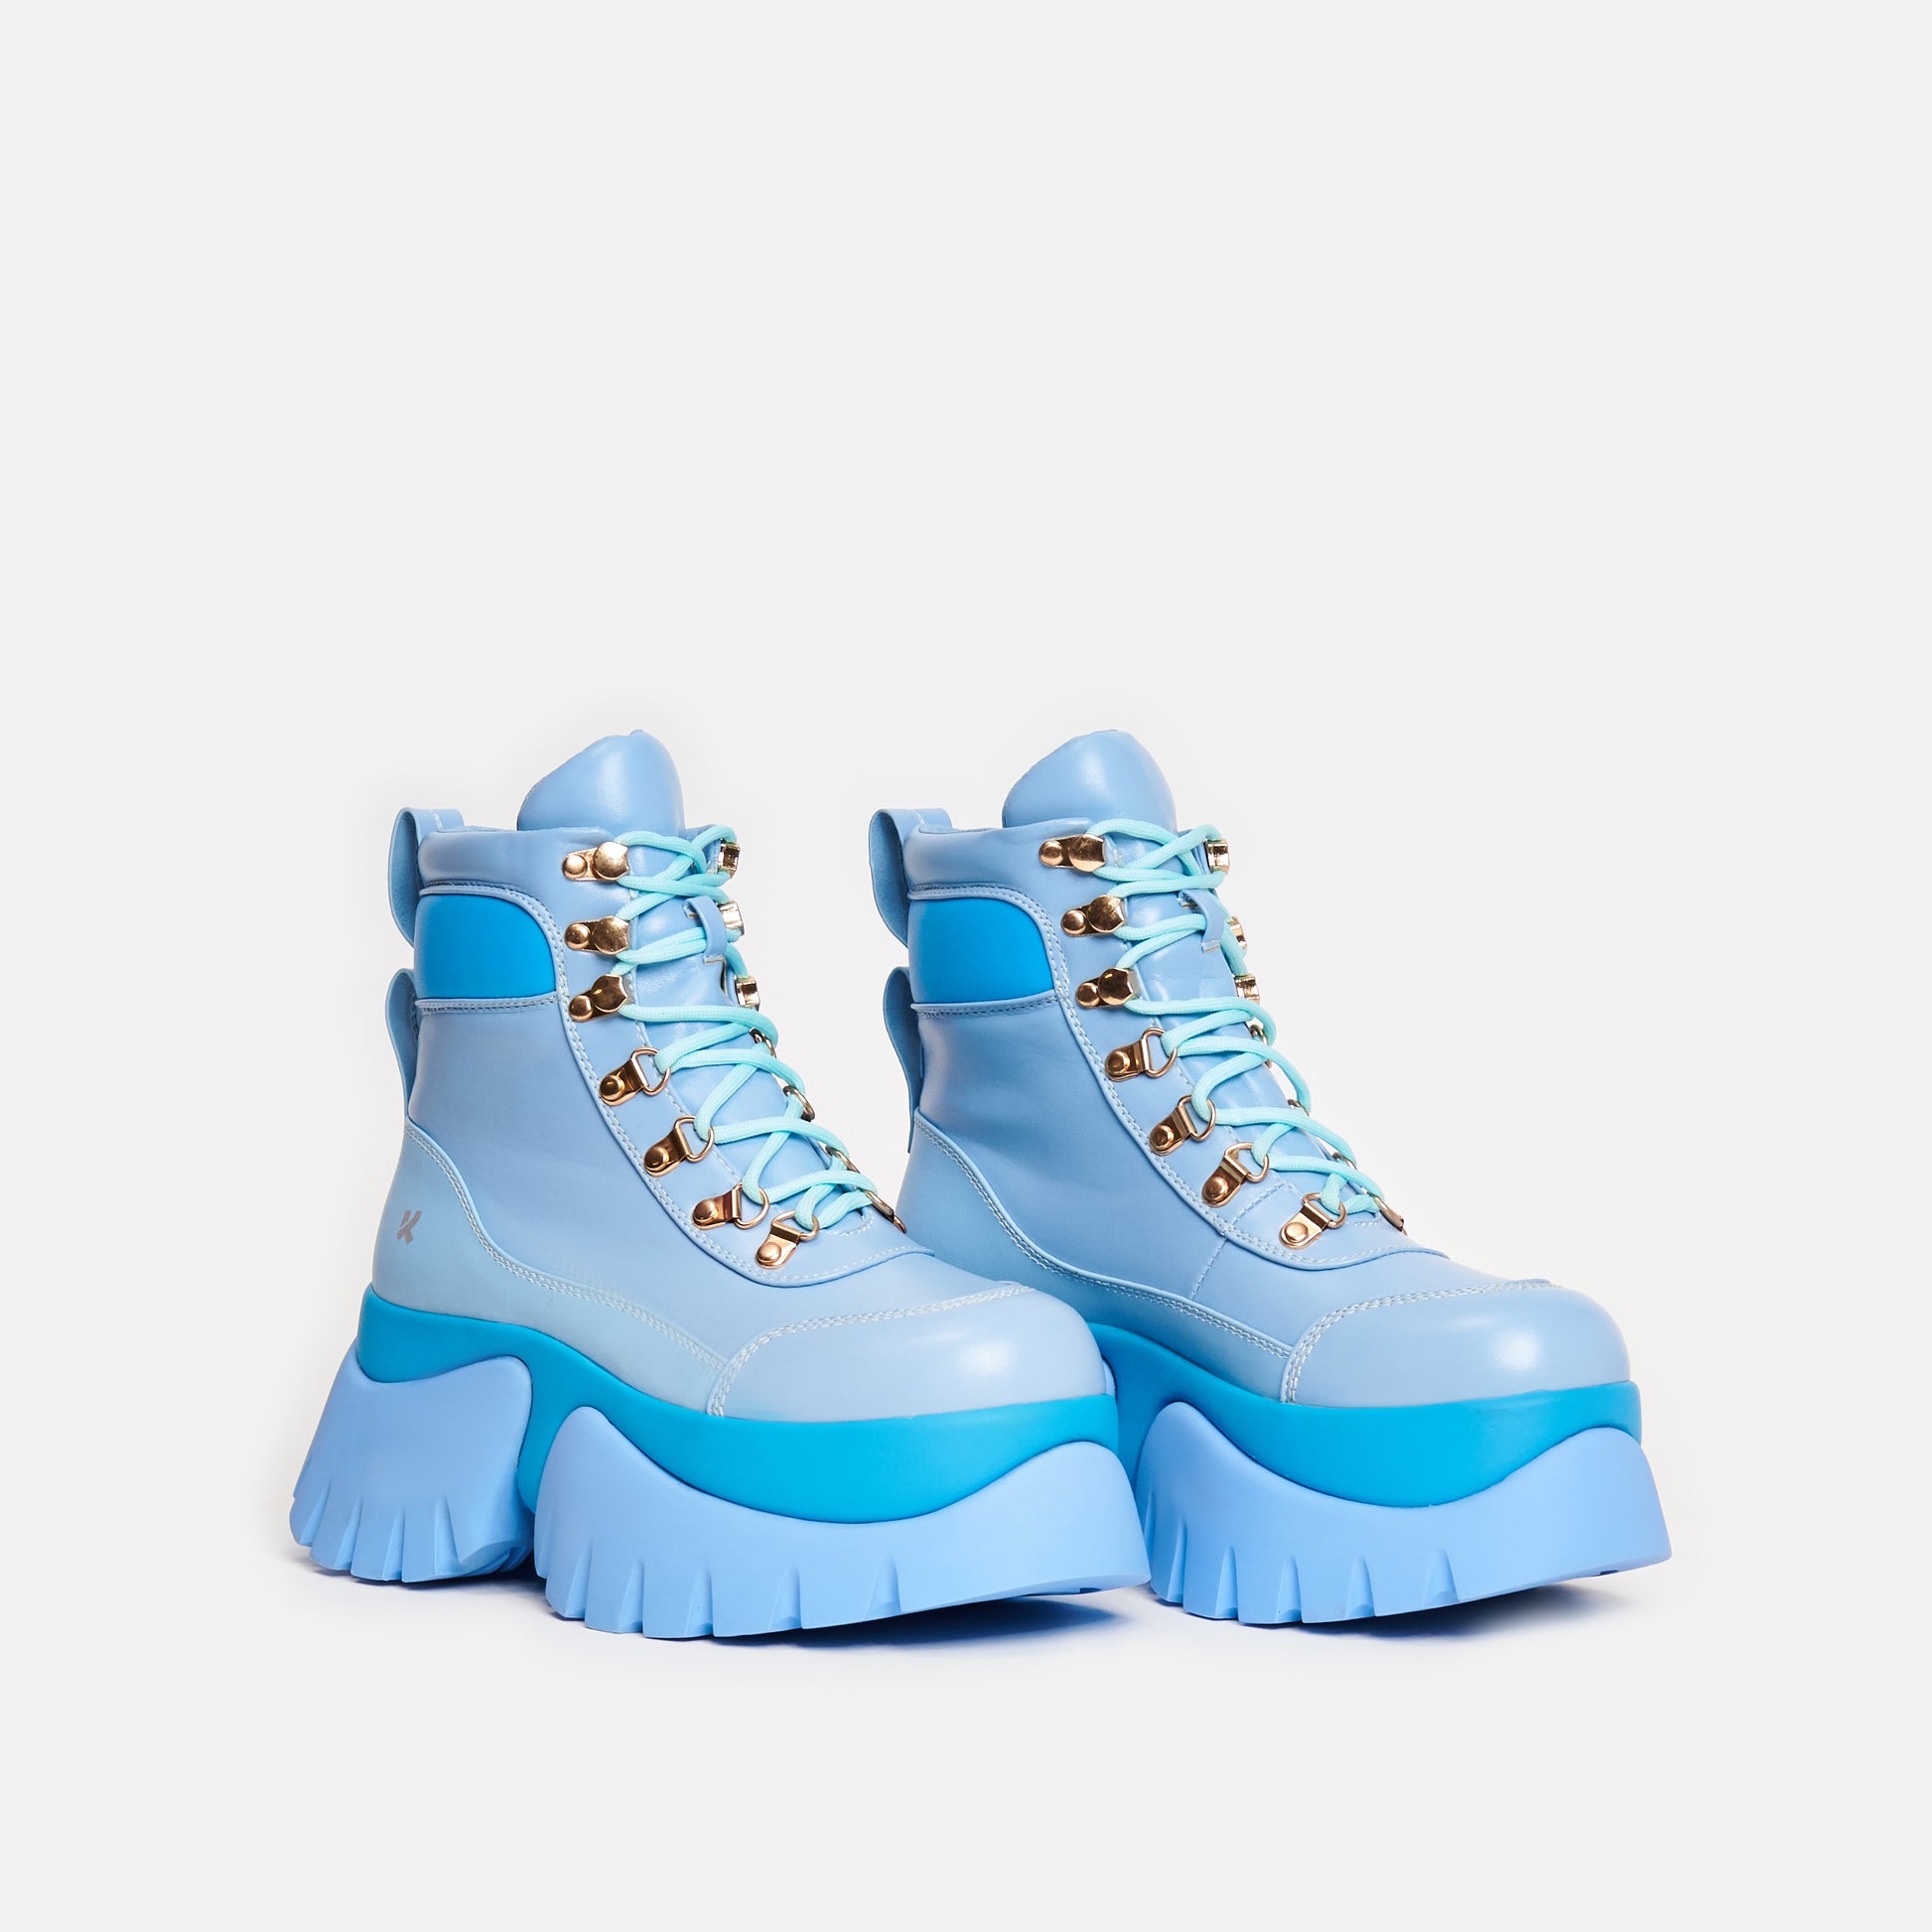 Crybaby Blue Vilun Platform Boots - Ankle Boots - KOI Footwear - Blue - Three-Quarter View